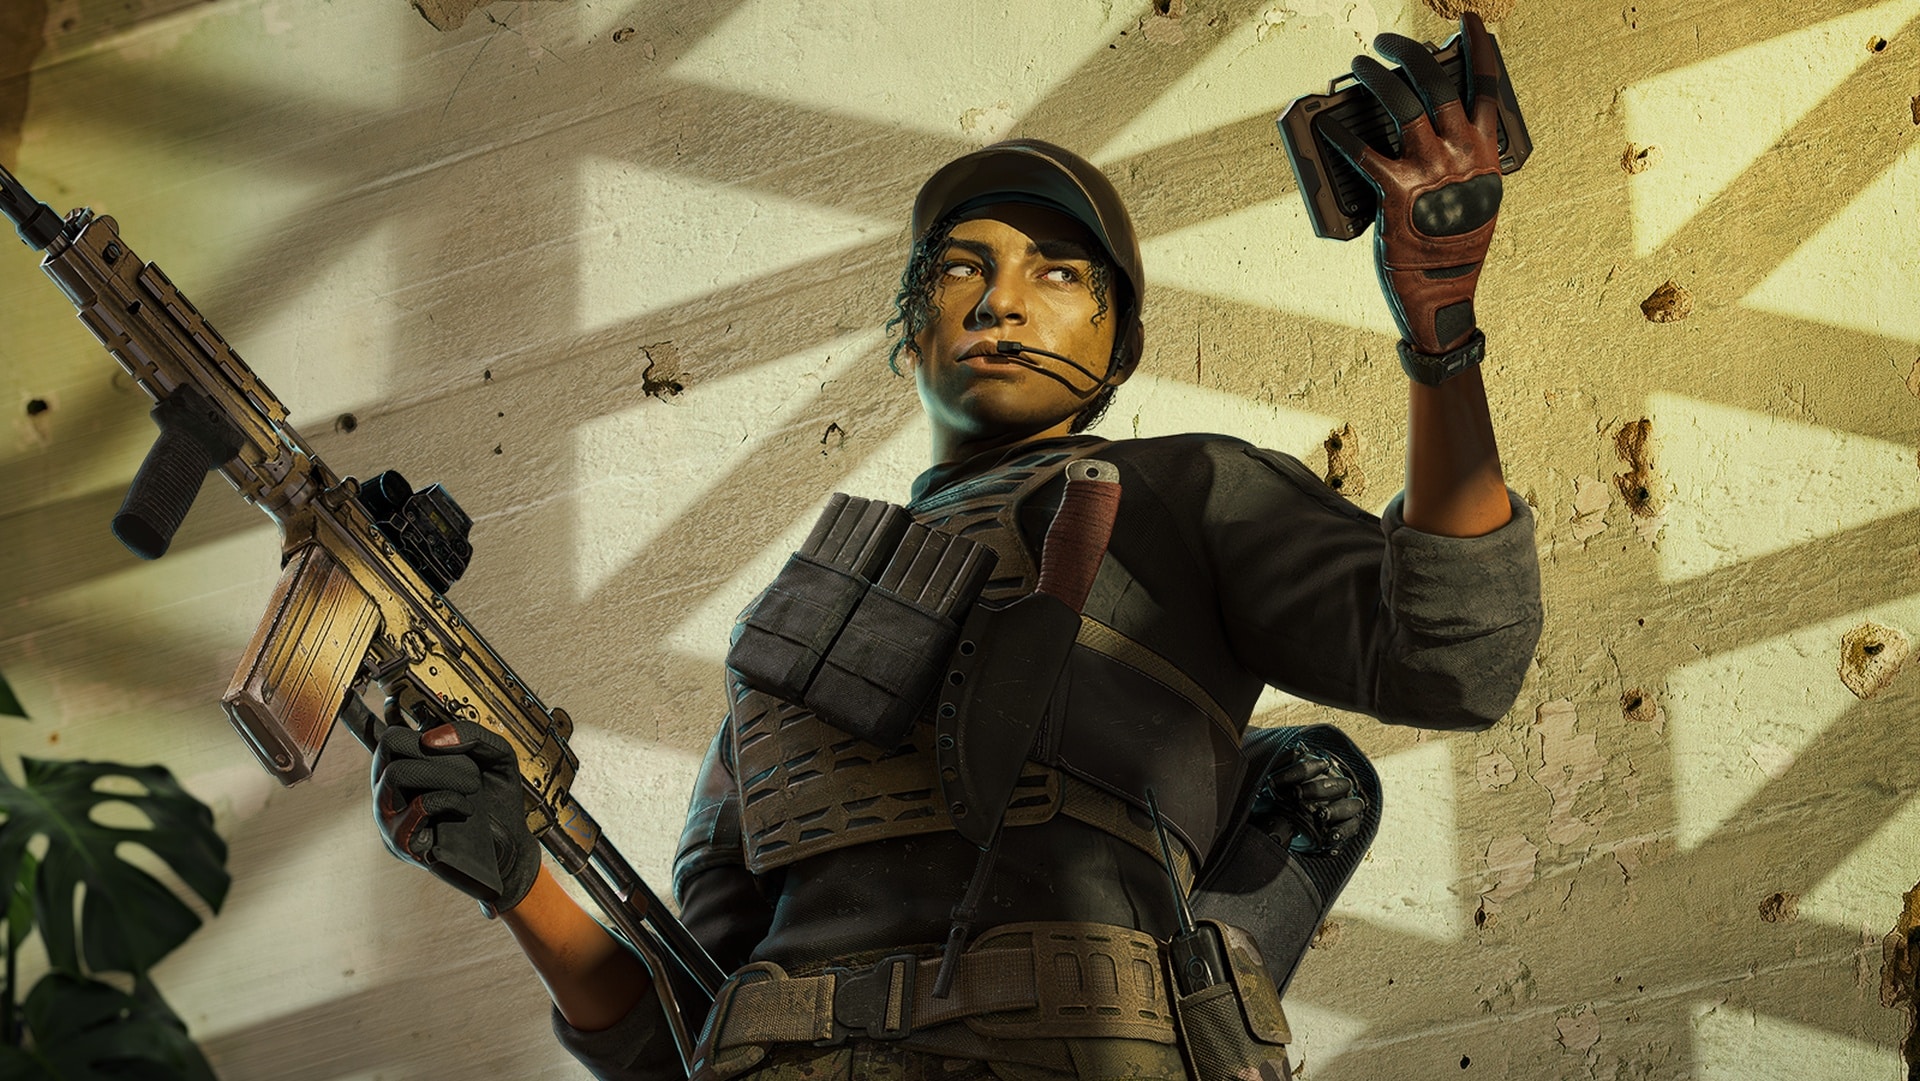 Rainbow Six Siege Update Coming; Here Are The Major Changes - GameSpot